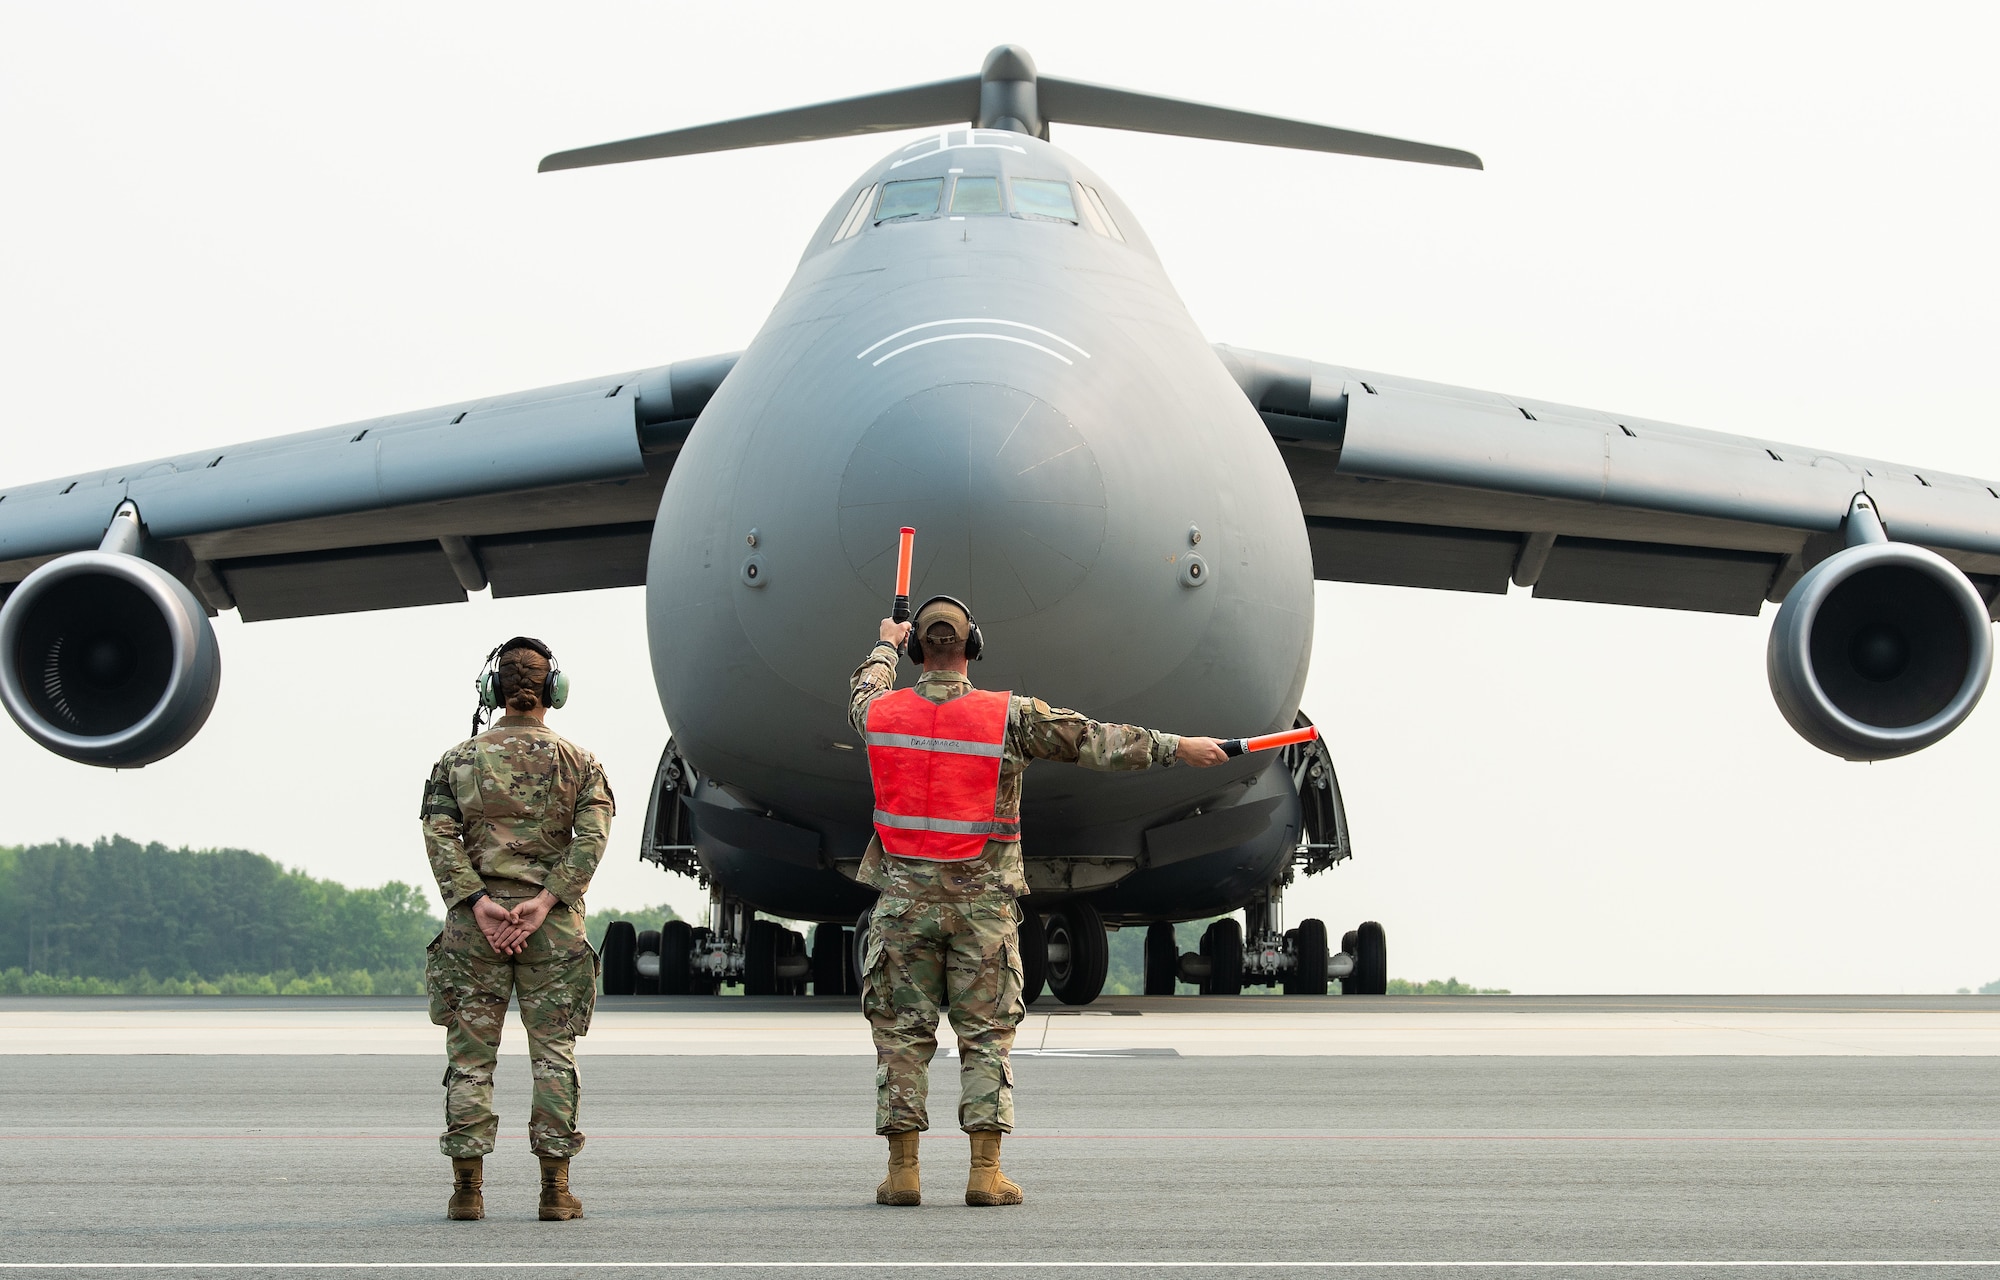 Capt. Kris Eddy, center, 436th Aircraft Maintenance Squadron aircraft maintenance unit officer in charge, marshals a C-5M Super Galaxy off its parking spot at Dover Air Force Base, Delaware, June 6, 2023. Airman 1st Class Sierra Davenport, left, 436th AMXS crew chief, provides Eddy with marshaling instructions as the aircraft moves towards them. The Super Galaxy was the second of seven to depart Dover AFB during the base’s hurricane evacuation exercise. (U.S. Air Force photo by Roland Balik)